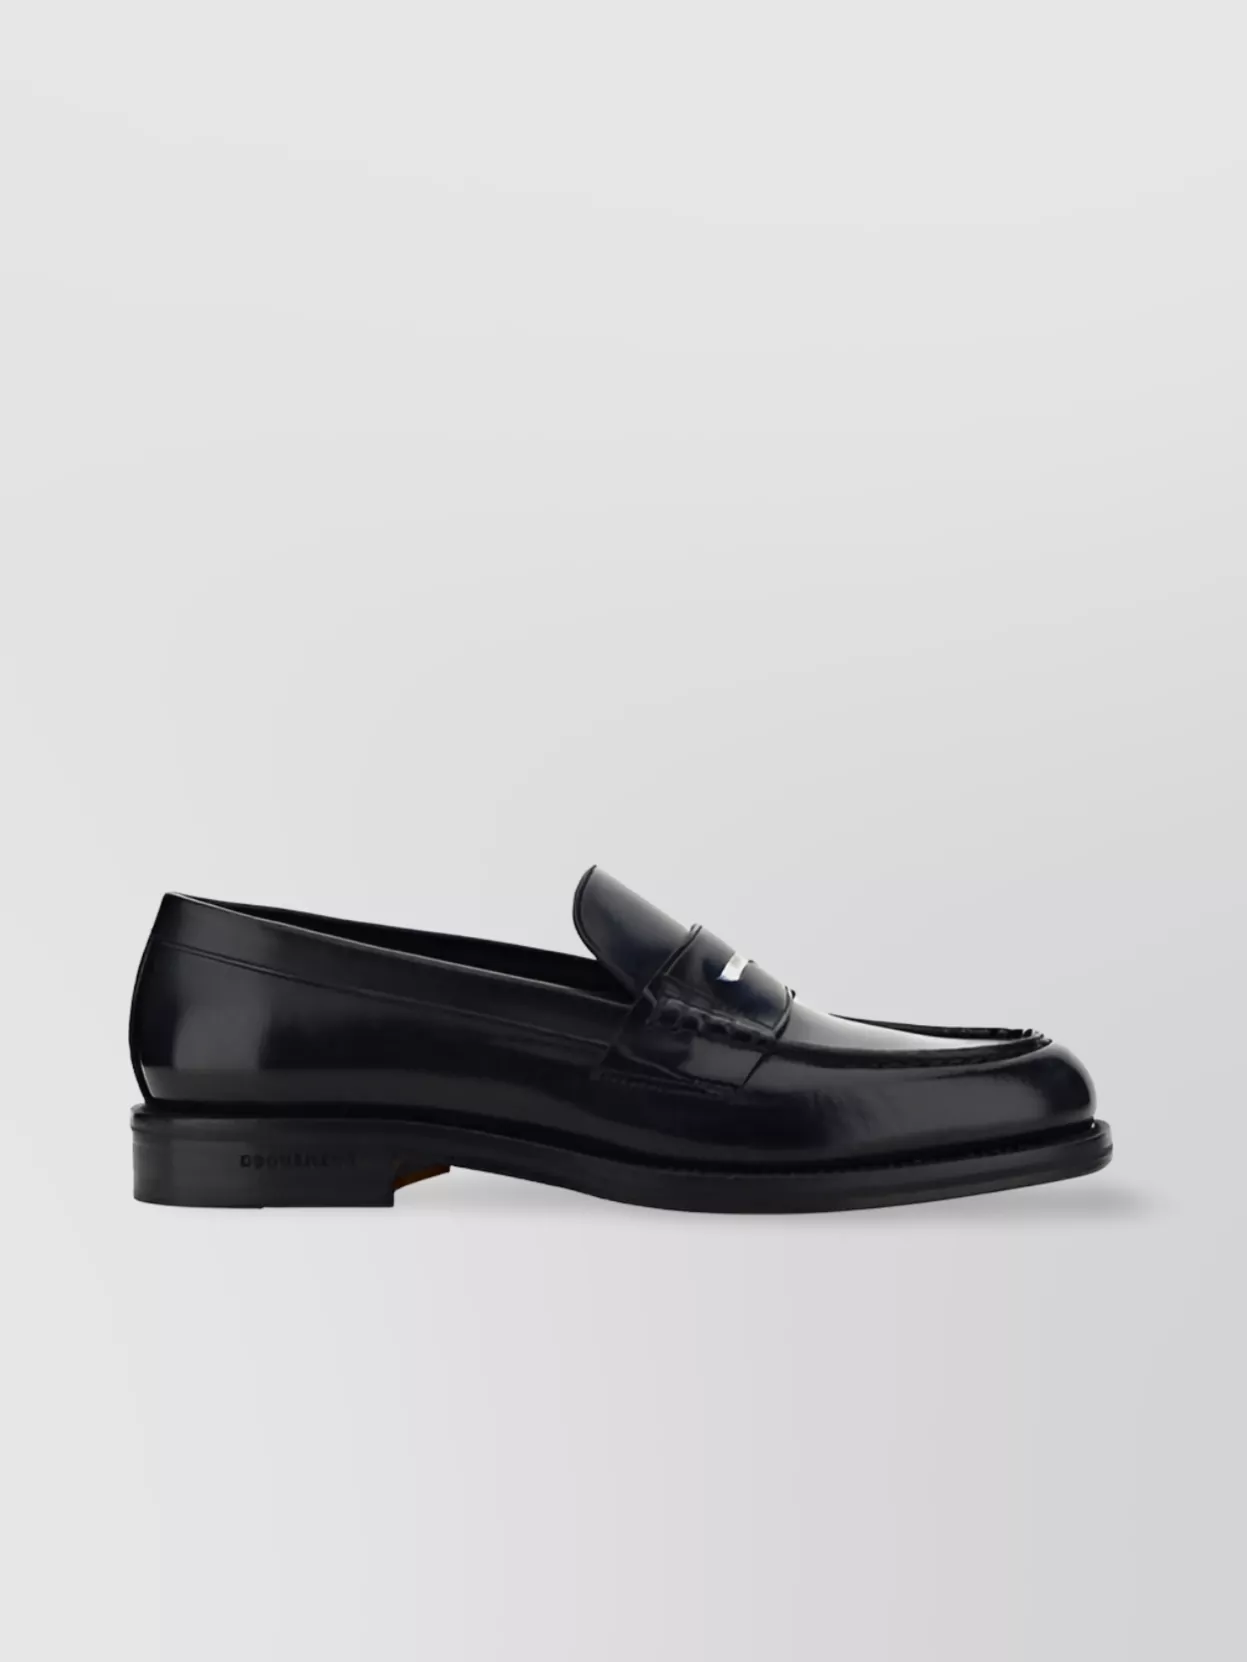 Dsquared2 Calfskin Penny Loafers Patent Finish